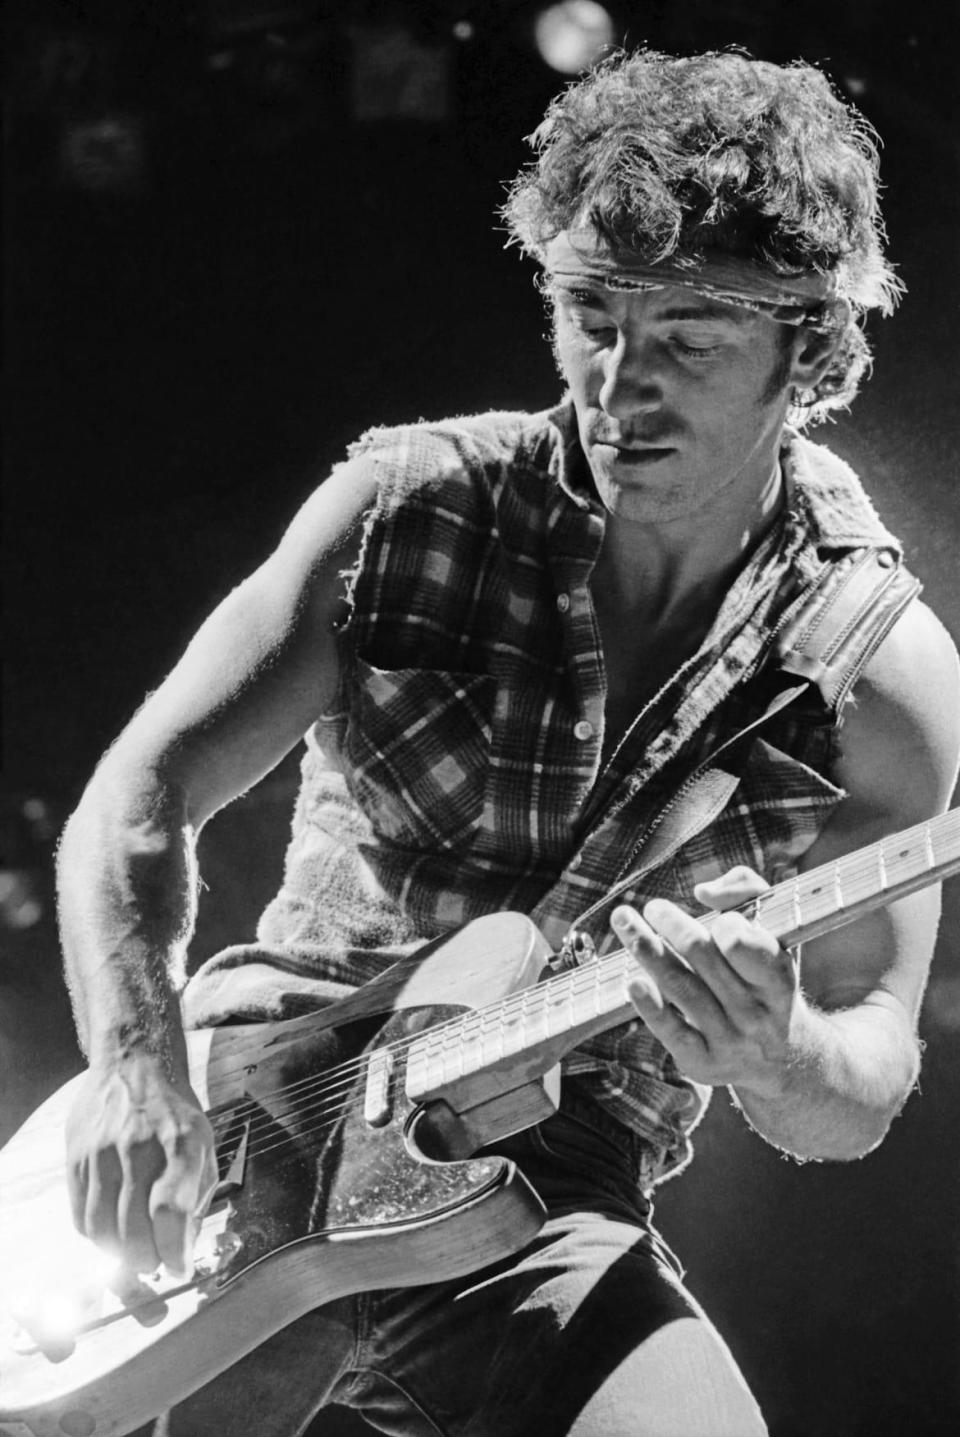 Bruce Springsteen in All His Rock Star Glory